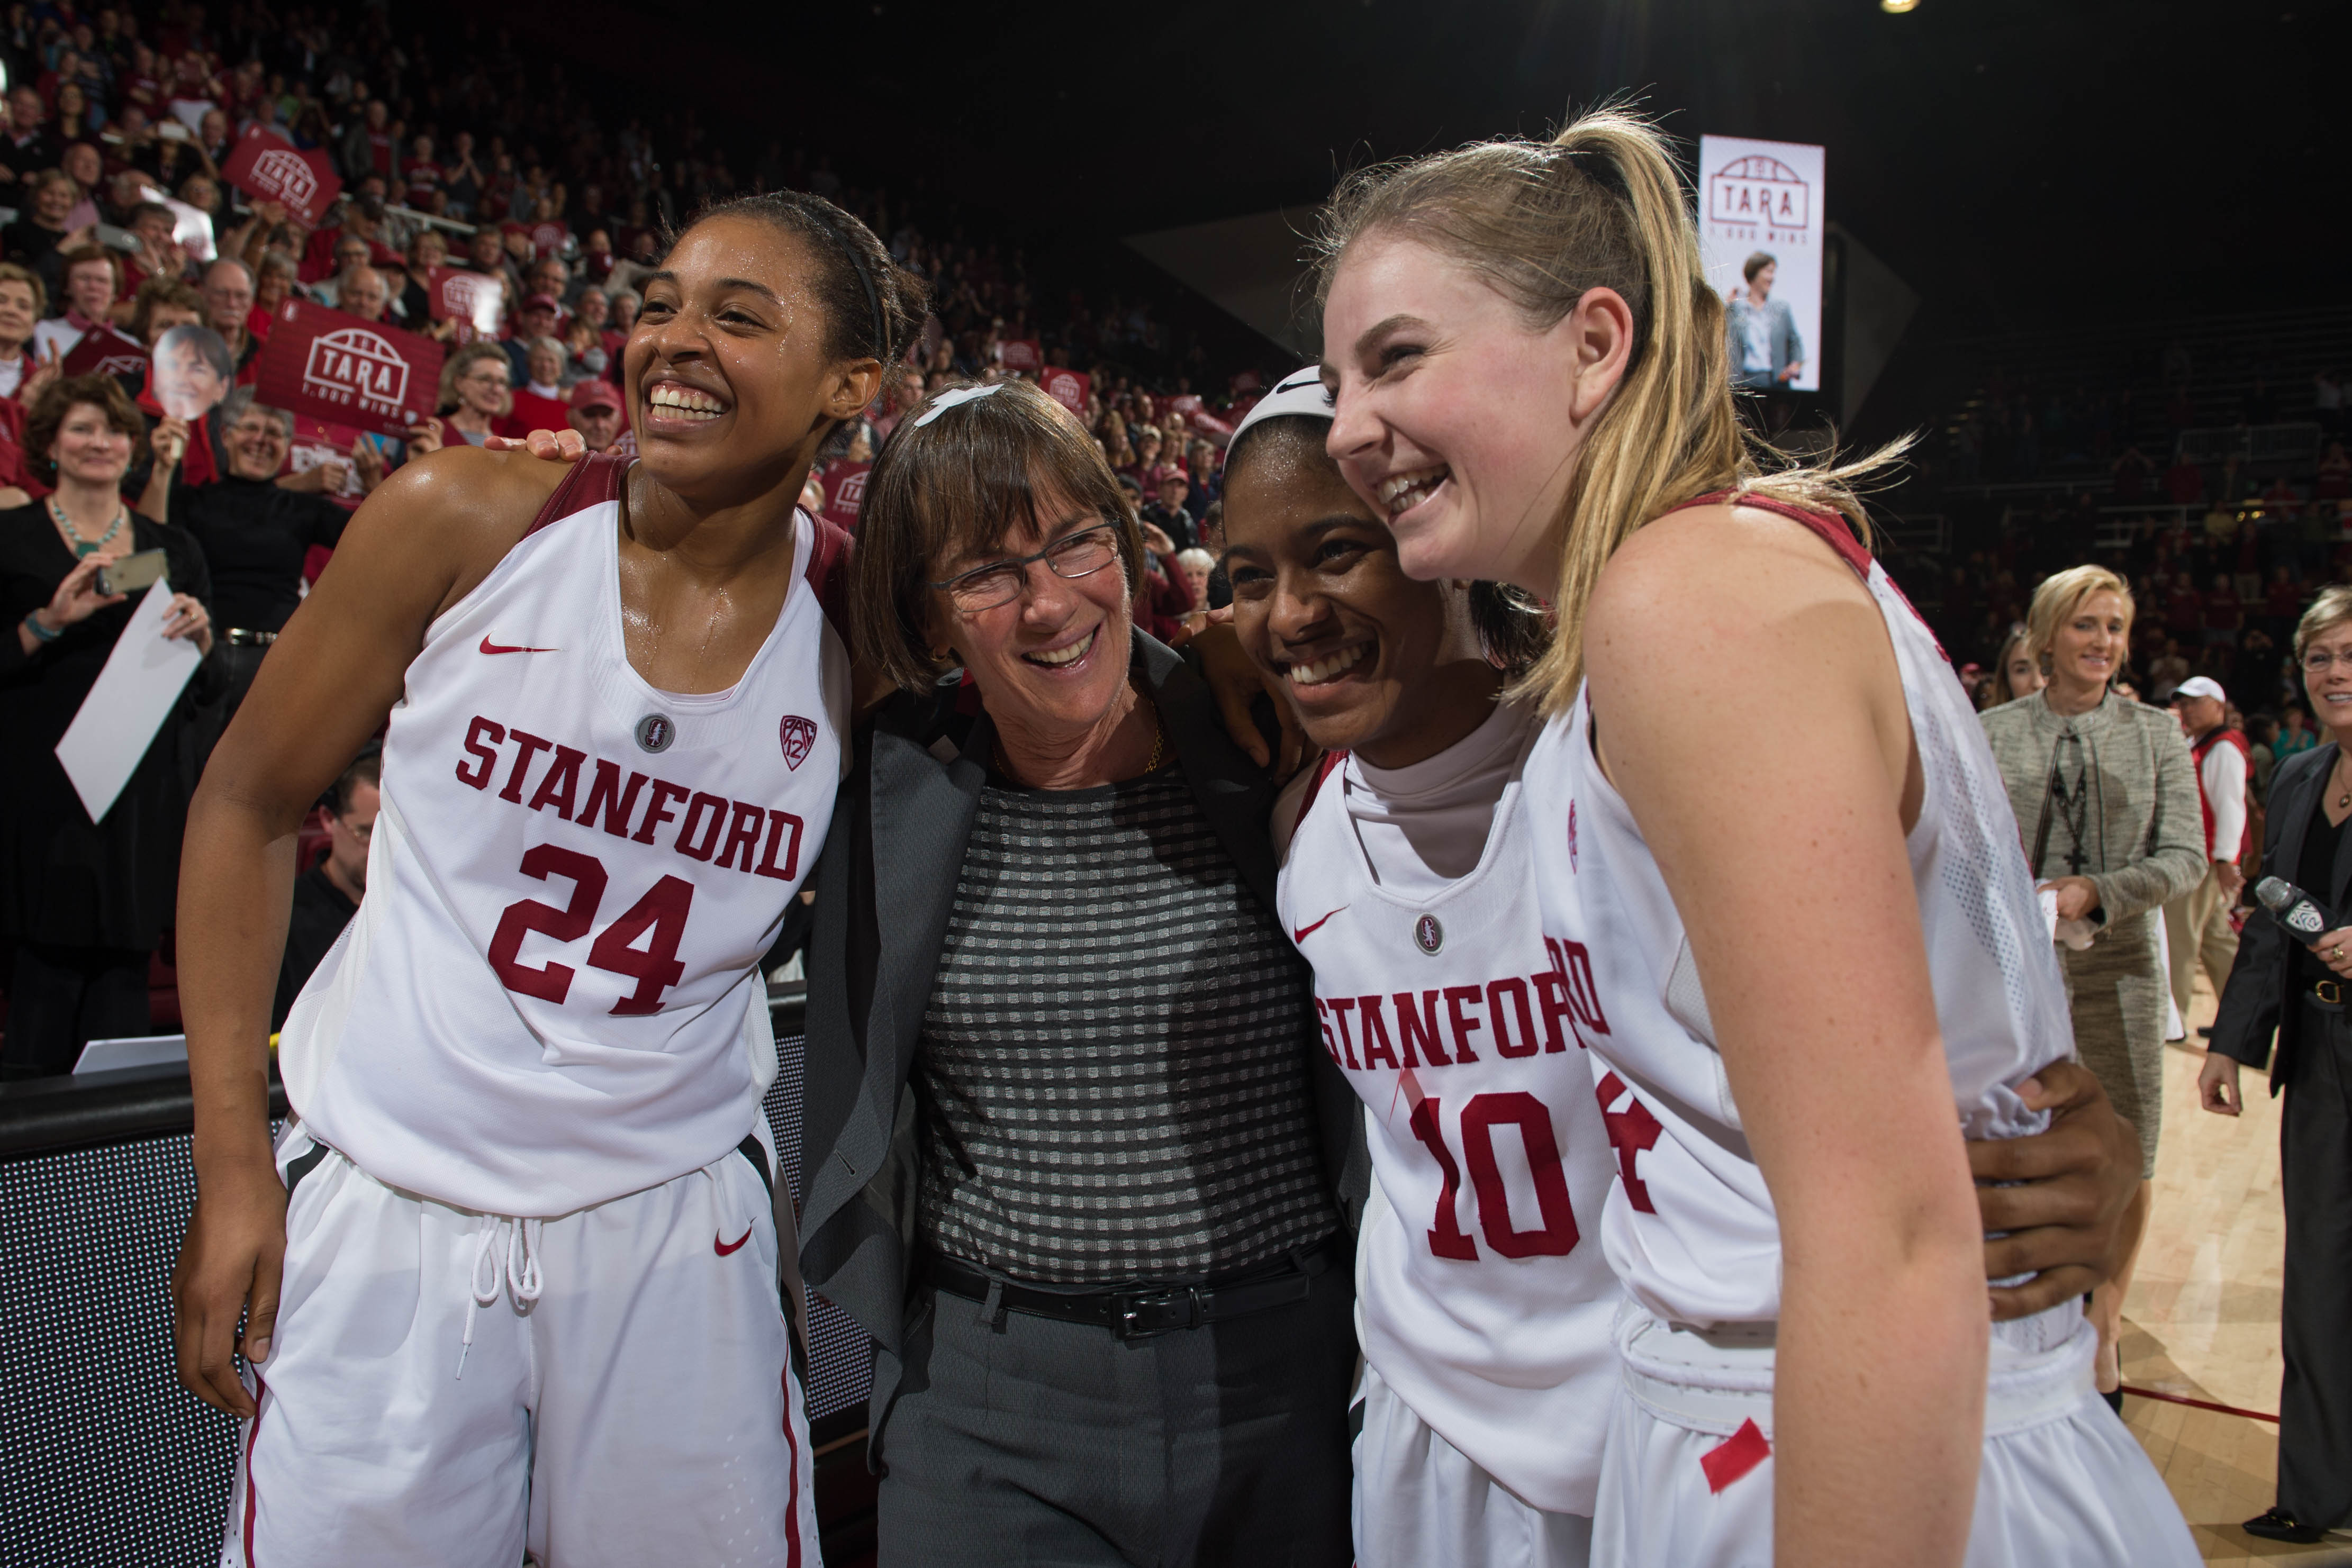 VanDerveer poses for a photo with players Erica McCall, Karlie Samuelson and Briana Roberson after Stanford defeated the visiting USC Trojans for Vanderveer's 1000th career victory.